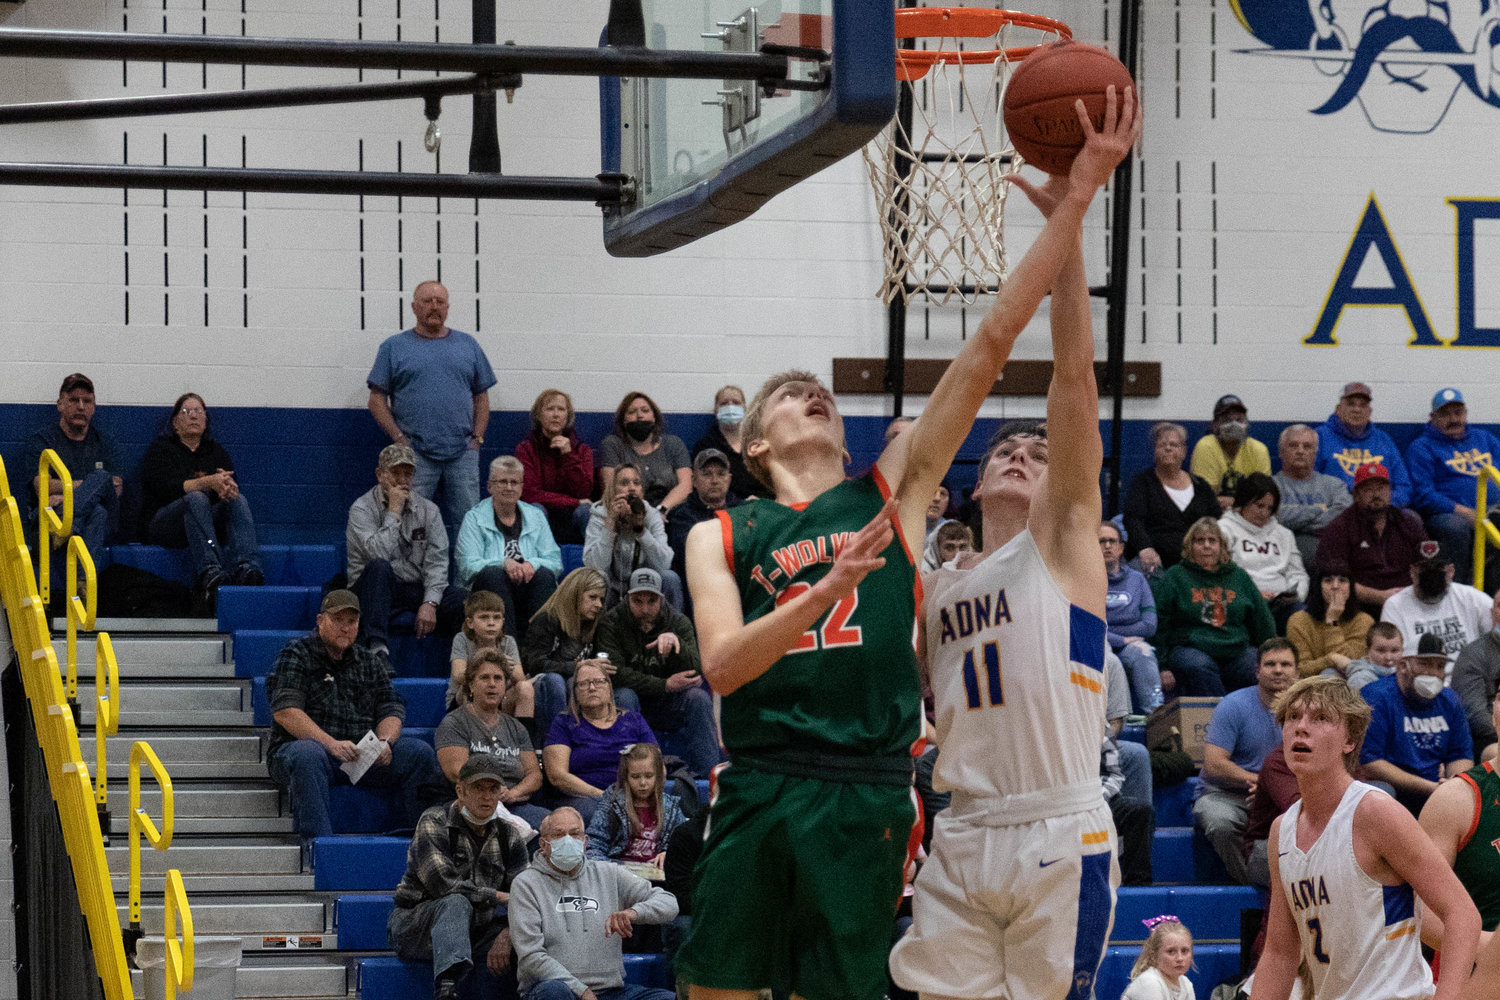 MWP forward Gary Dotson rises for a reverse layup against Adna's Chase Collins Jan. 28.